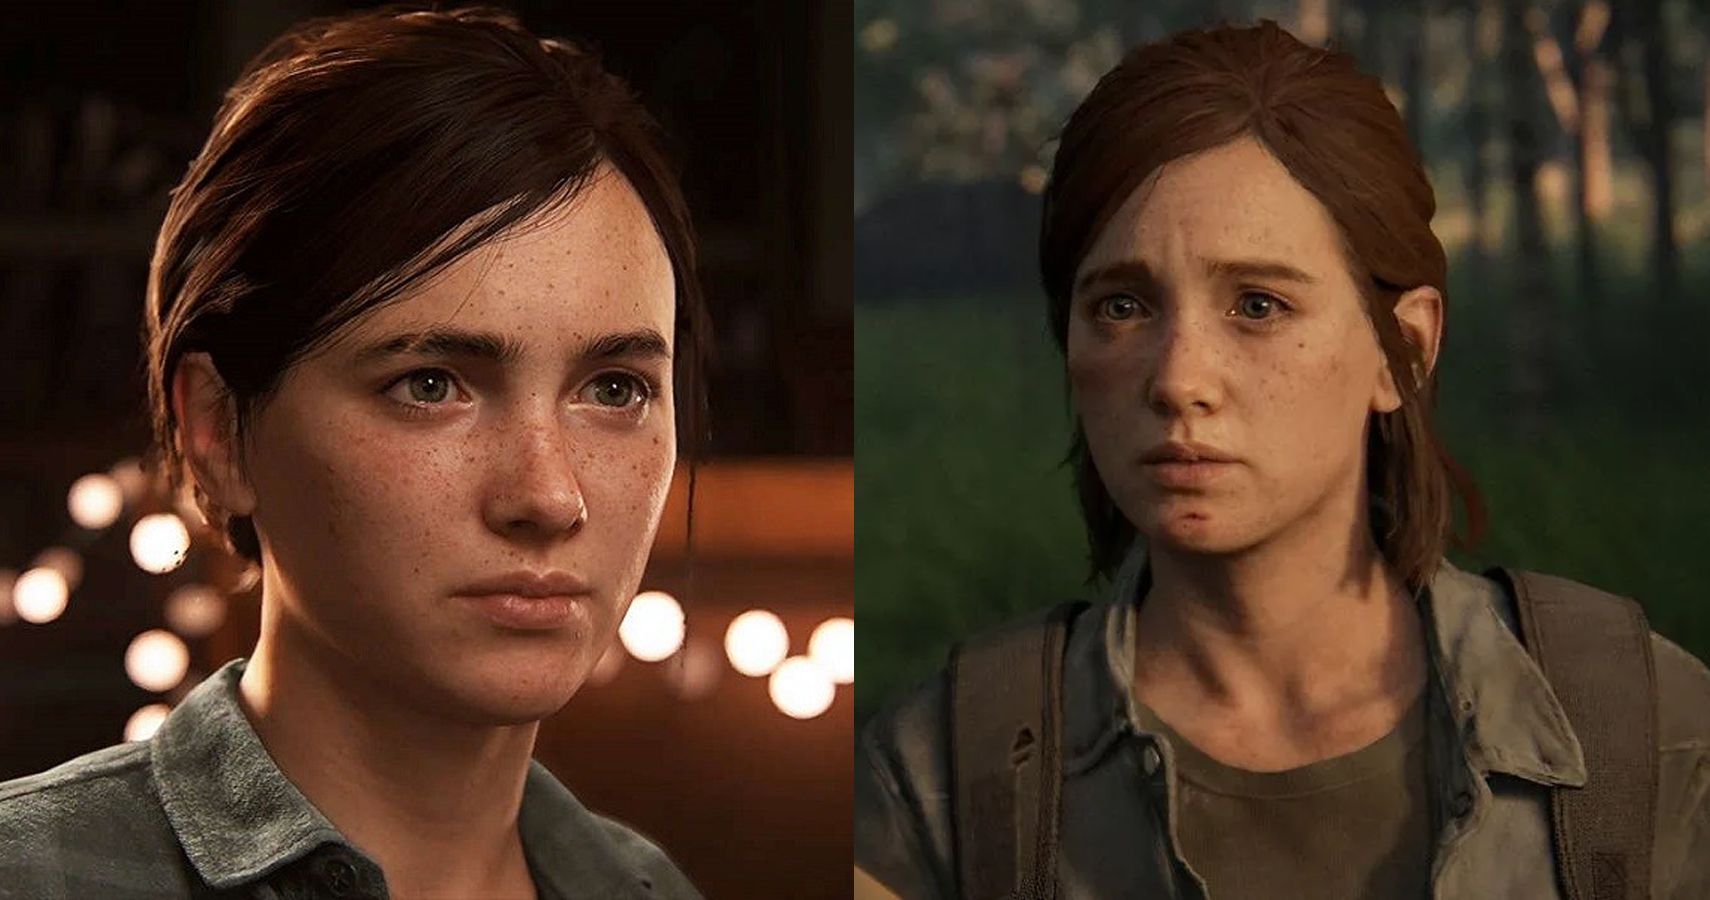 How old is Ellie in The Last of Us Part 2?